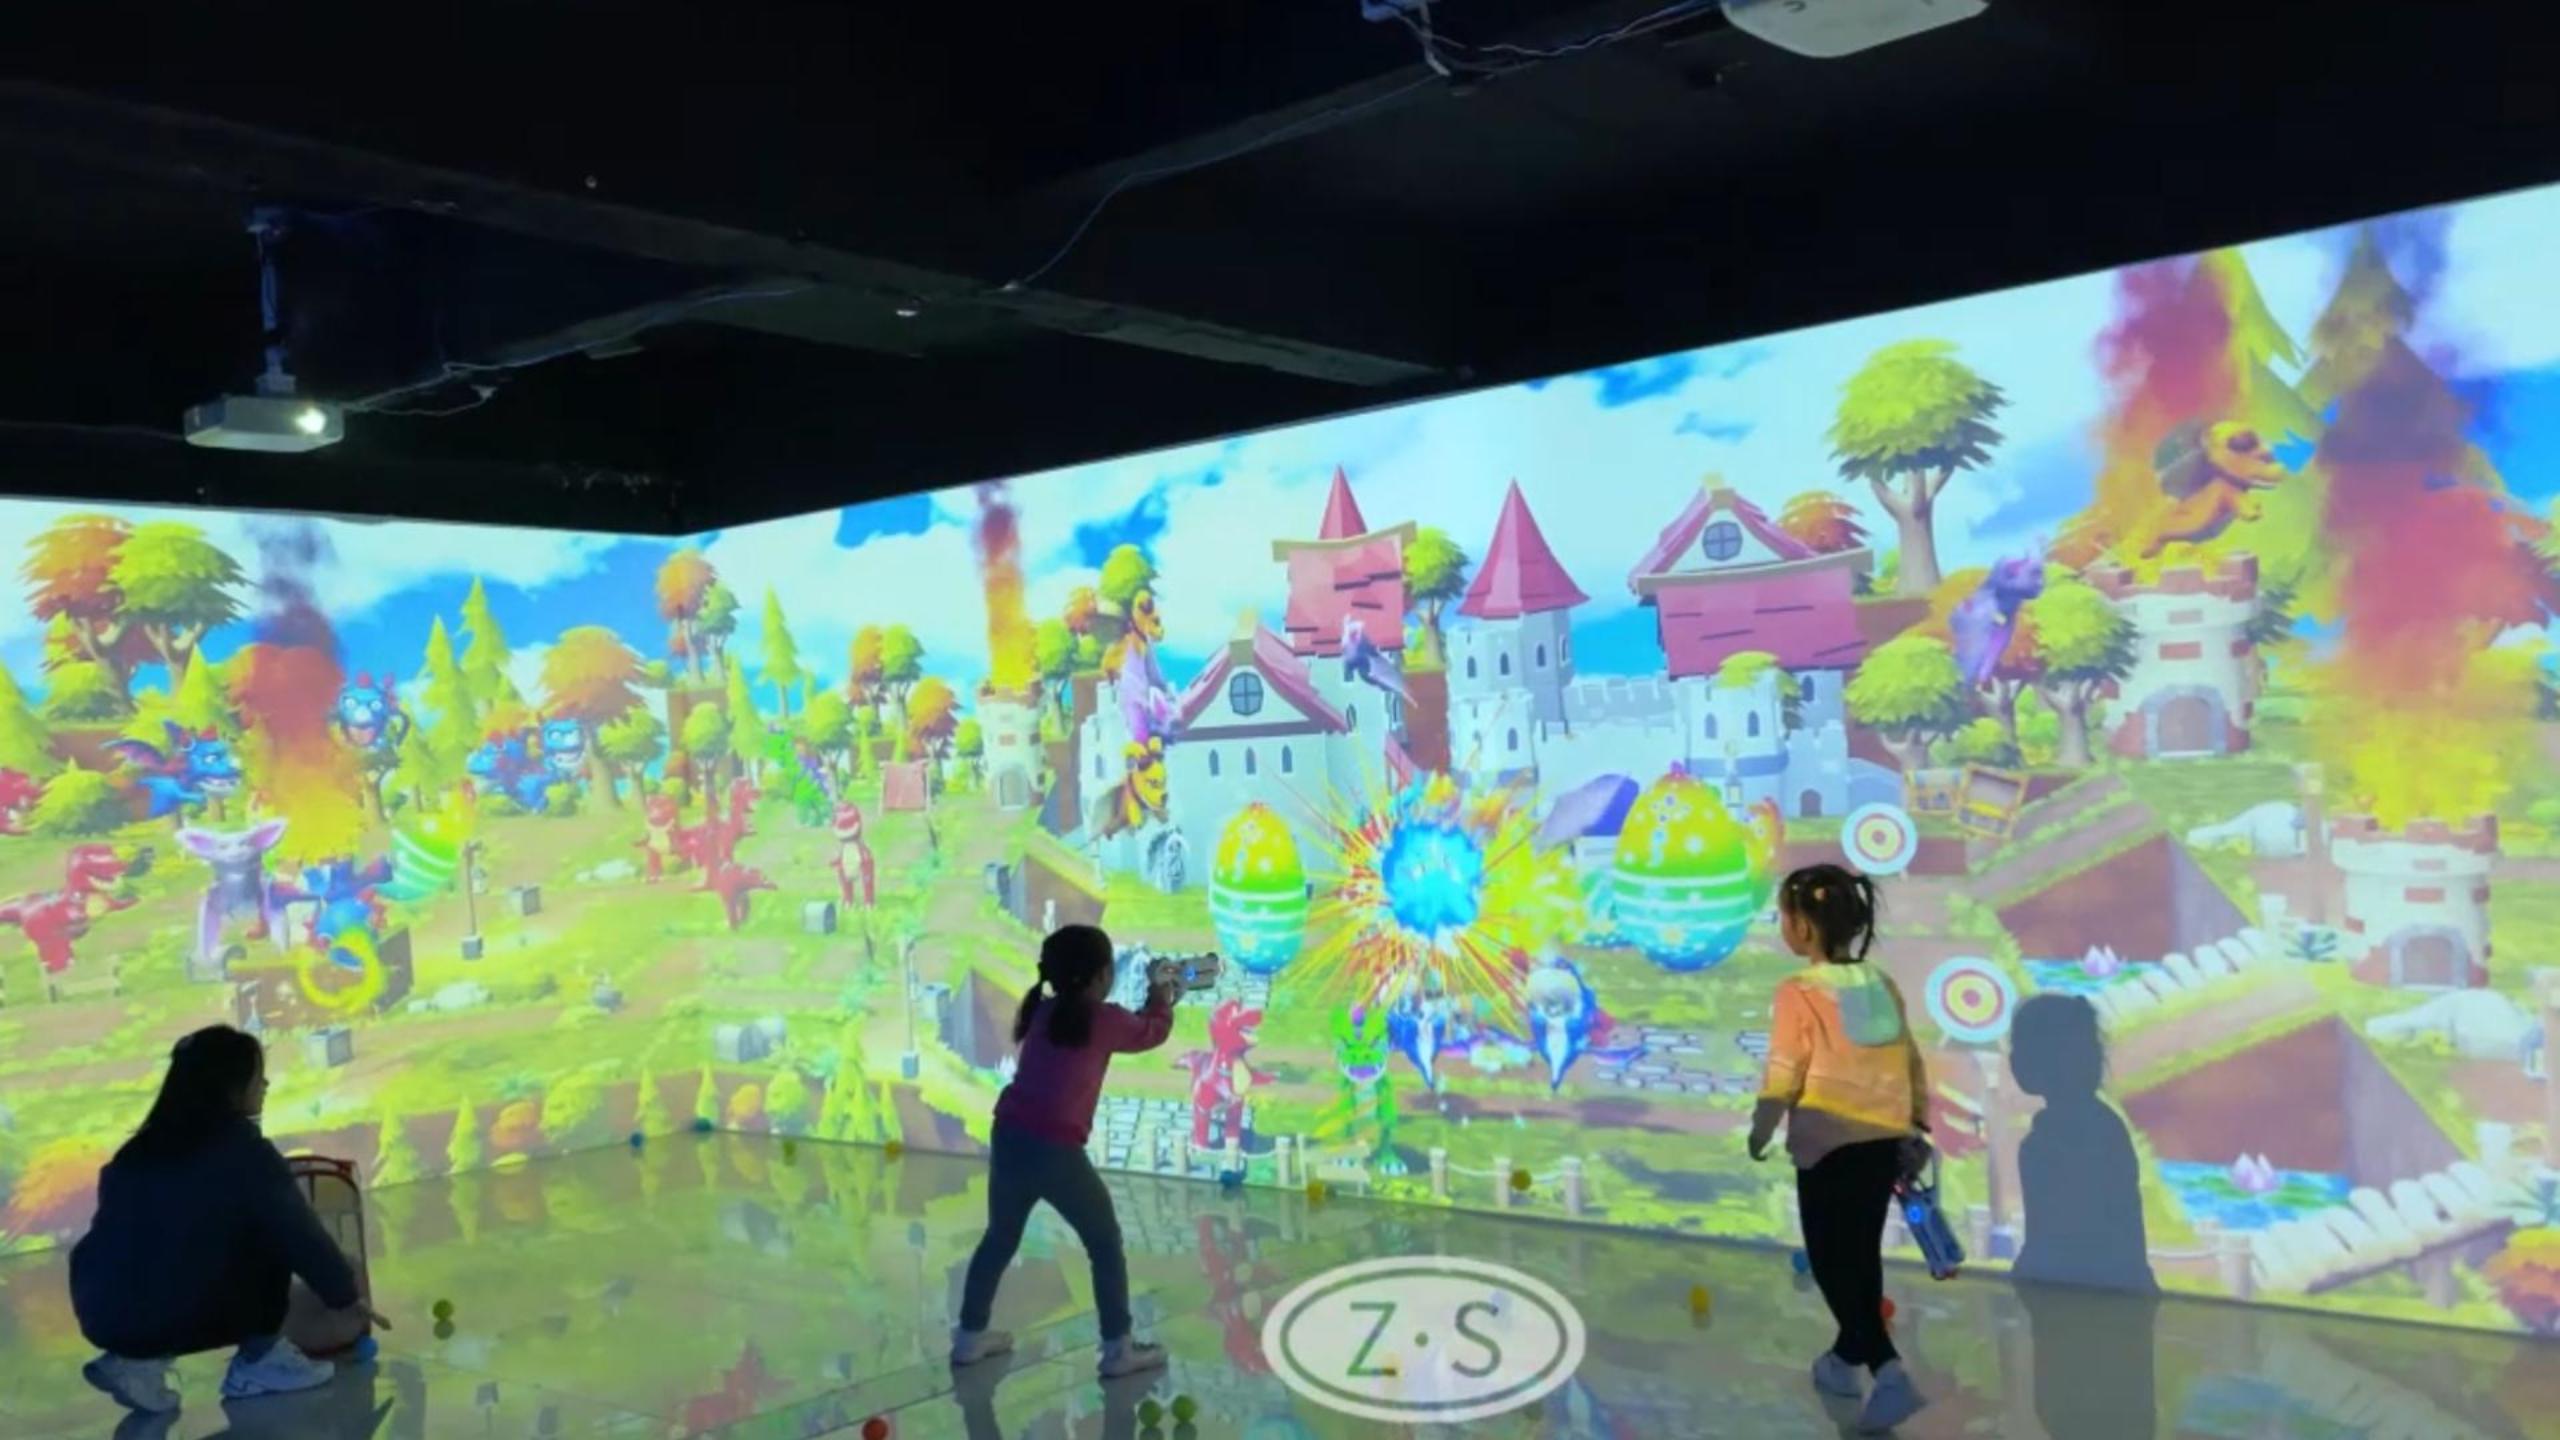 Gallery-Interactive Projector and Interactive Projection Solutions Supplier